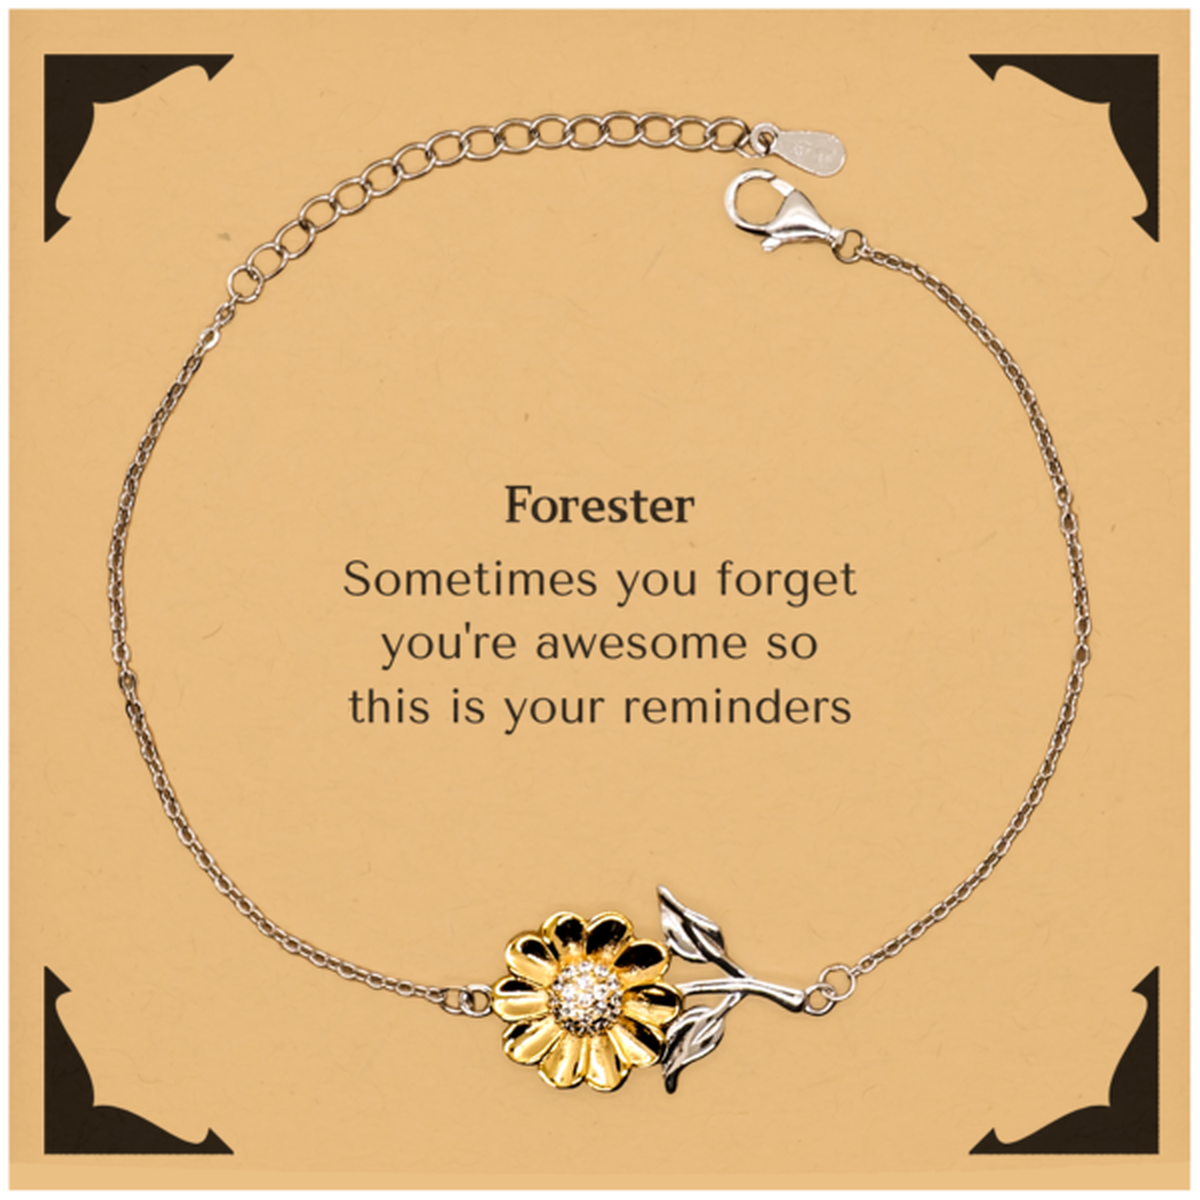 Sentimental Forester Sunflower Bracelet, Forester Sometimes you forget you're awesome so this is your reminders, Graduation Christmas Birthday Gifts for Forester, Men, Women, Coworkers